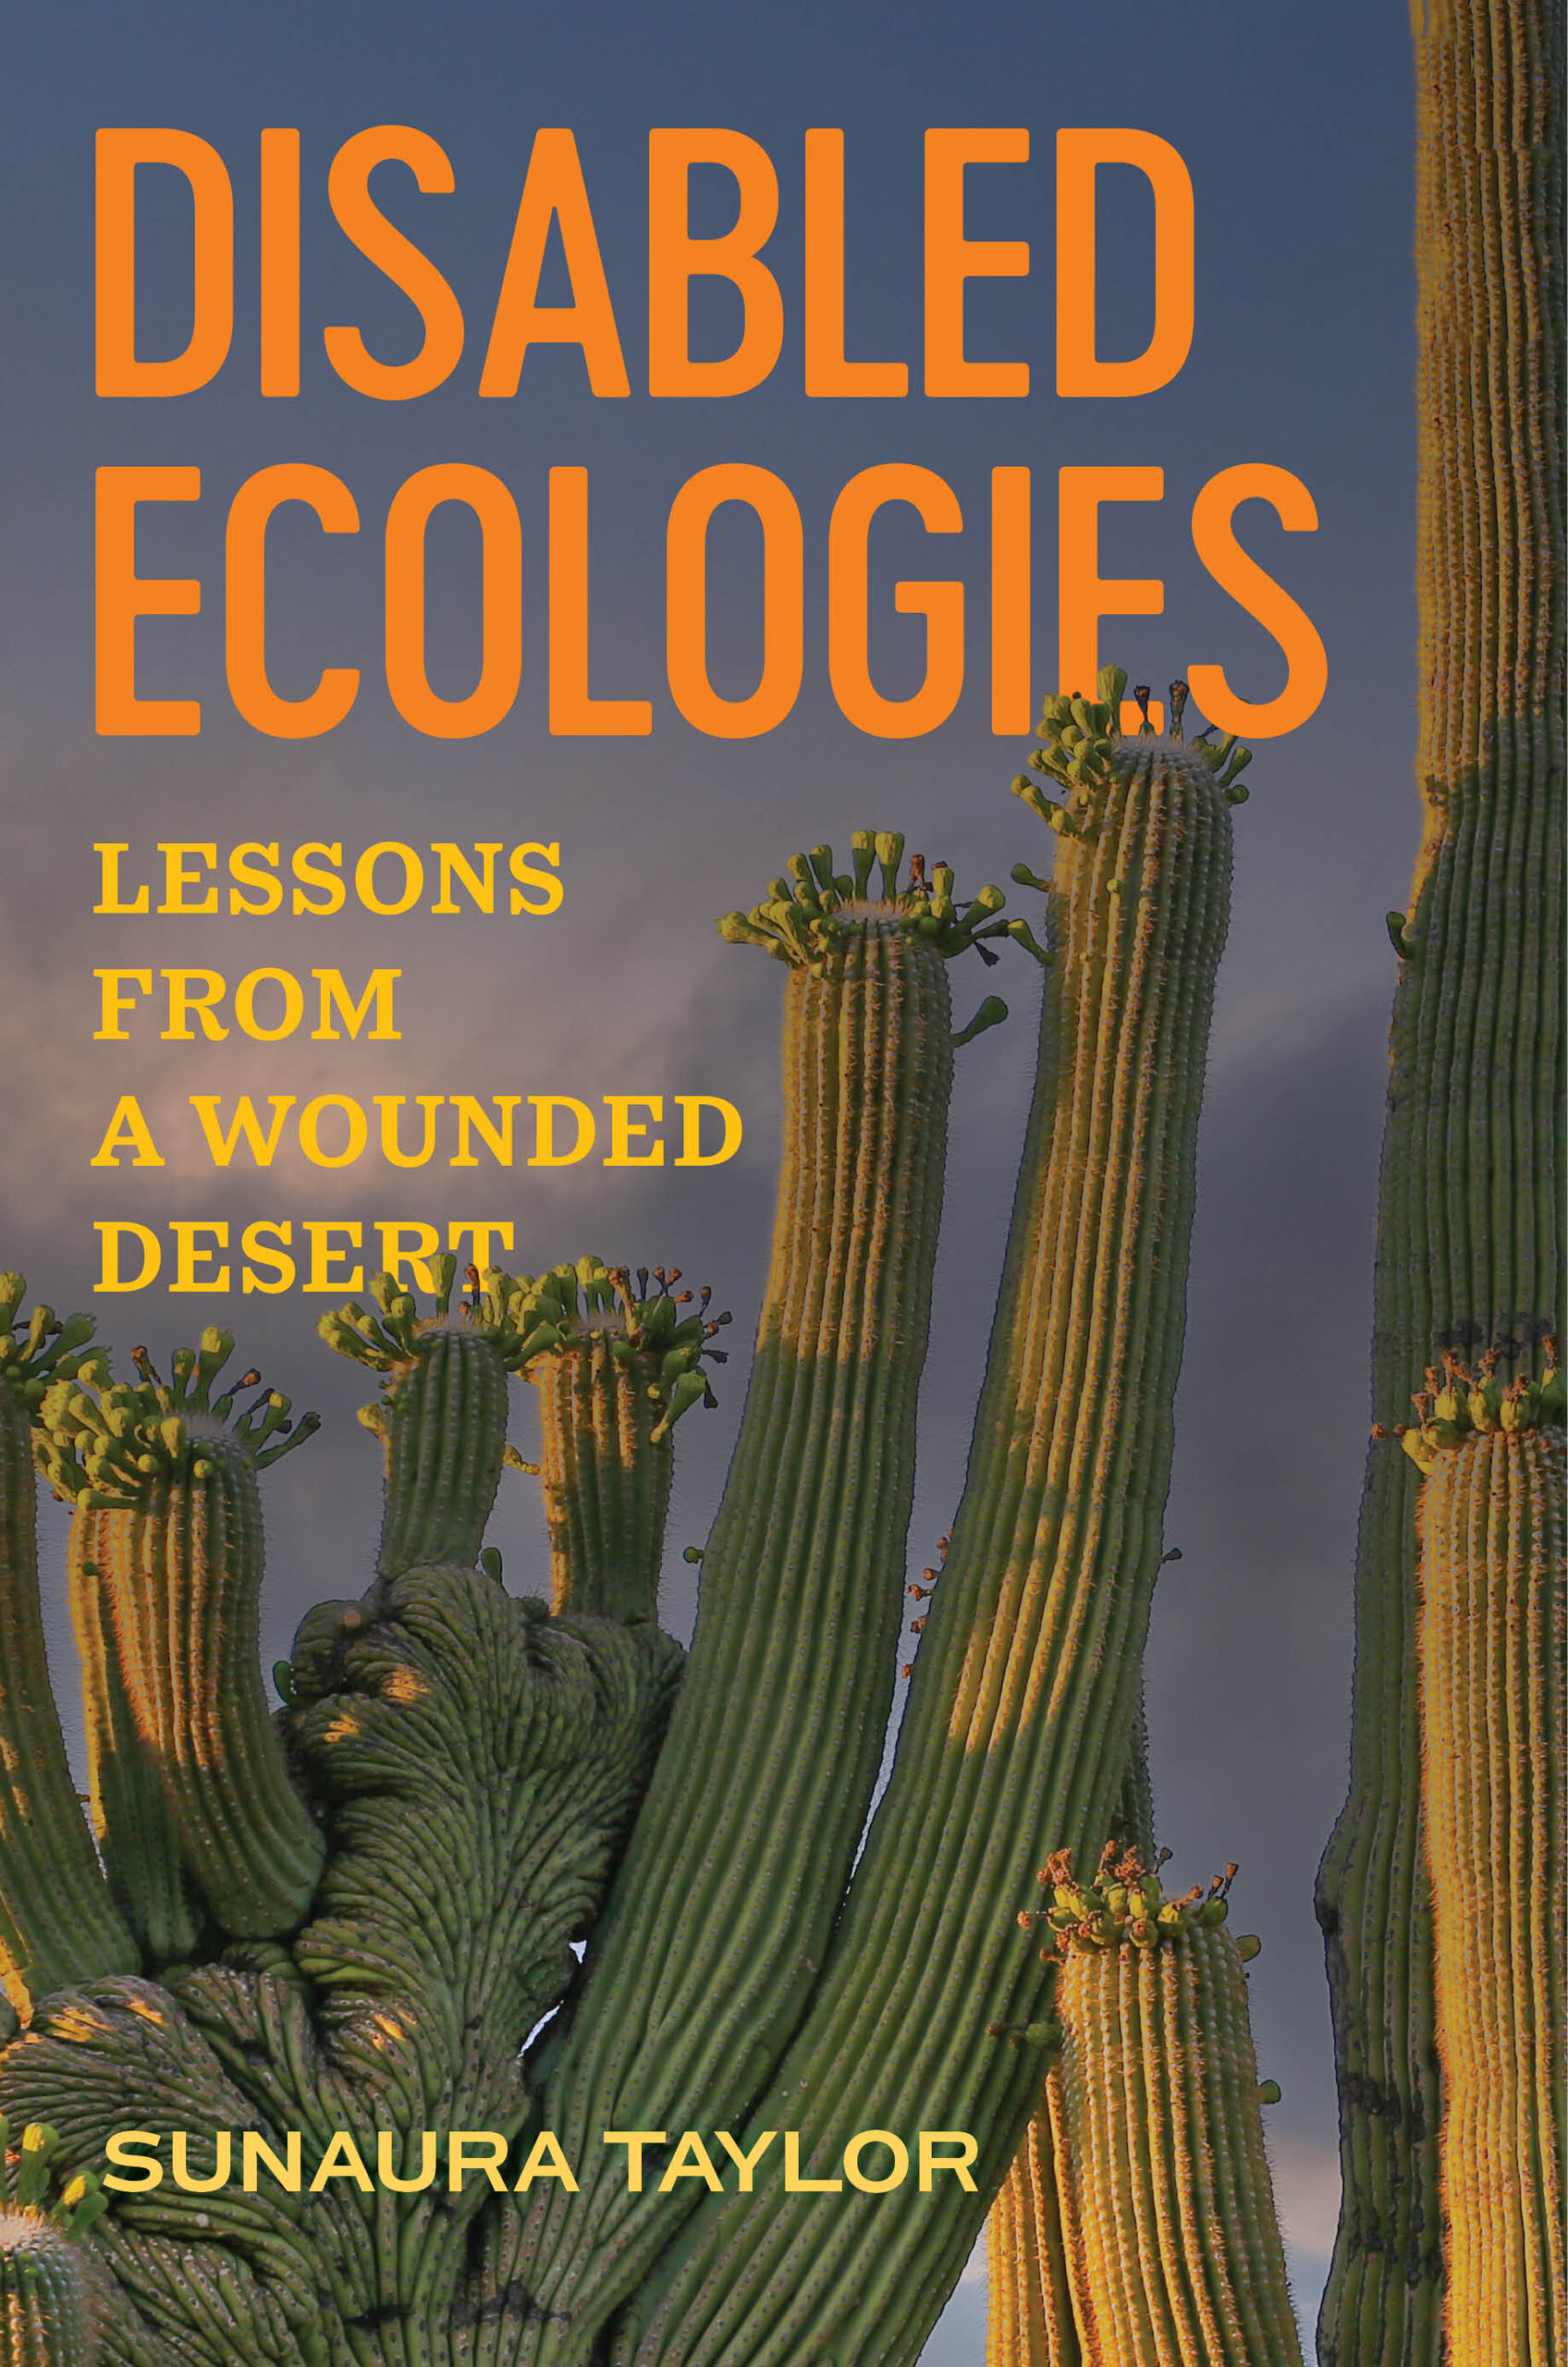 A book cover that reads "Disabled Ecologies: Lessons from a Wounded Desert" in yellow with a large cactus as the background.